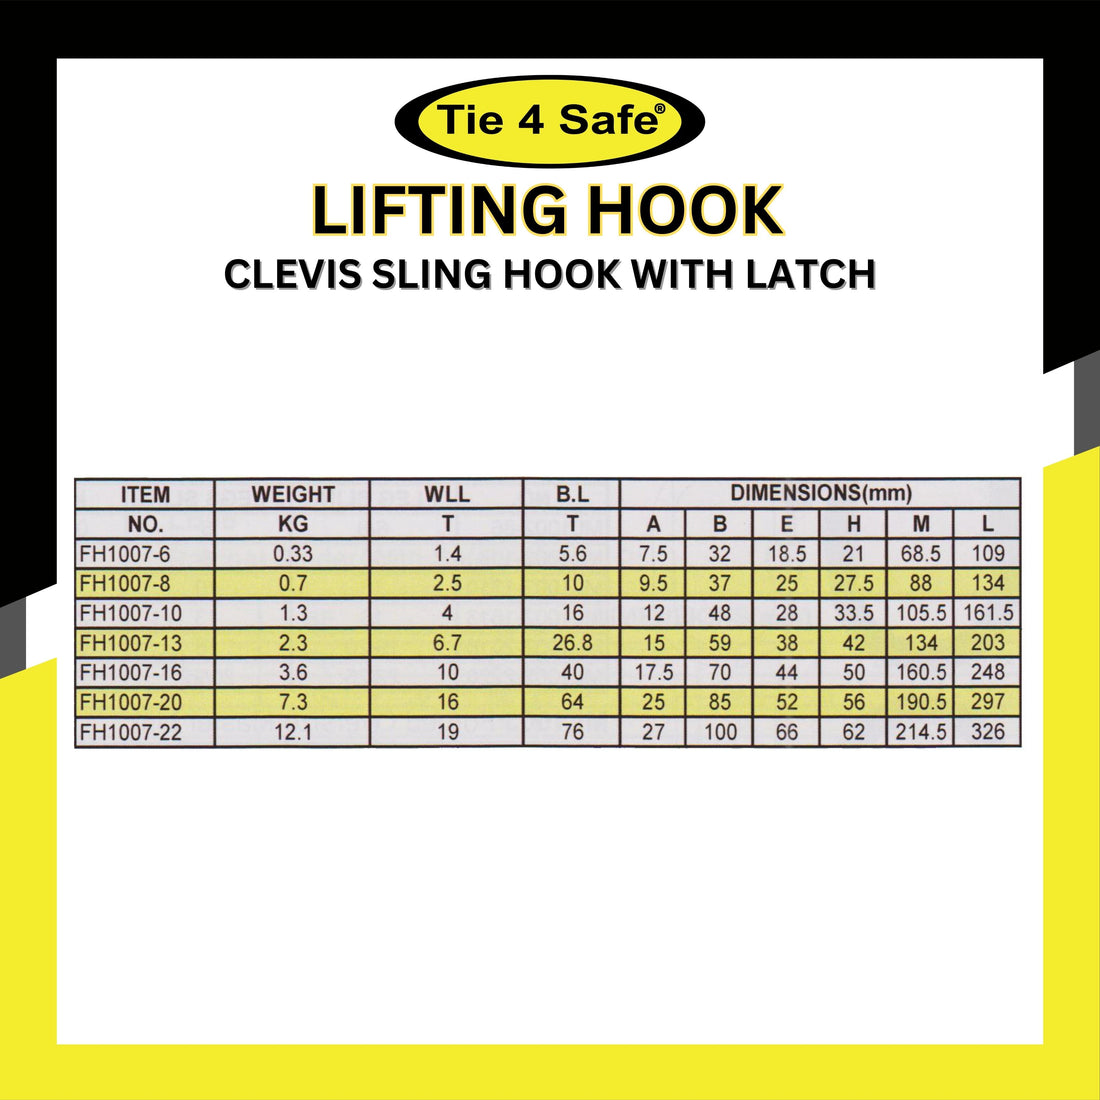 Clevis Sling Hook With Latch